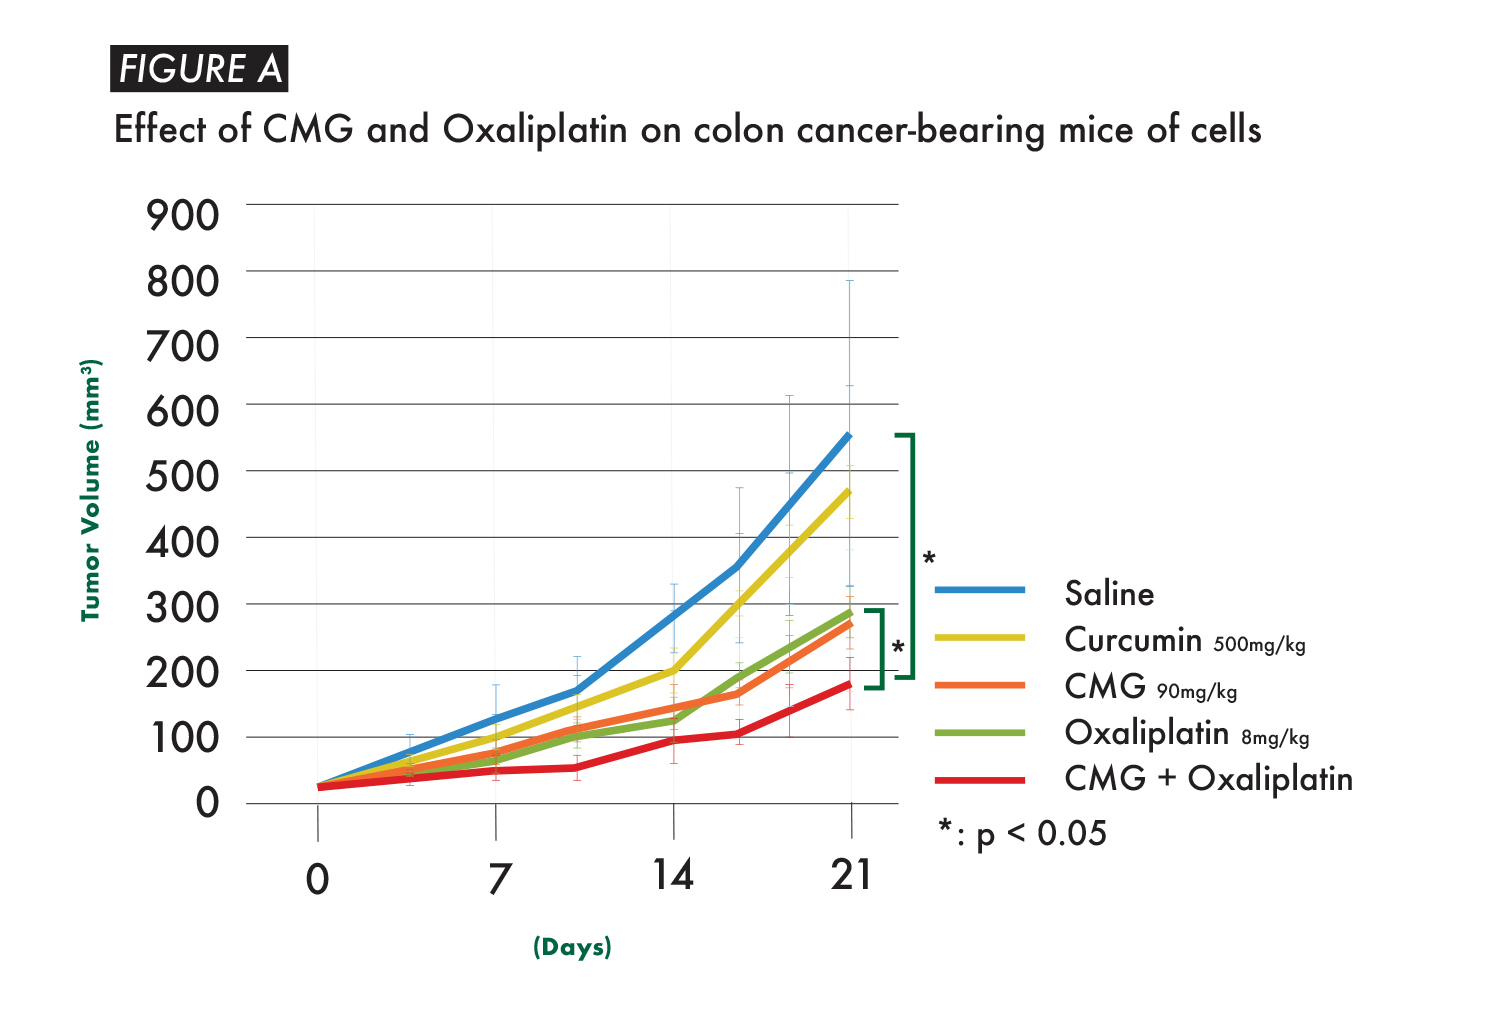 CMG reduces the side effects of Oxaliplatin on liver functions, such as increases in both ALT and AST, which are the indicators of liver damage.